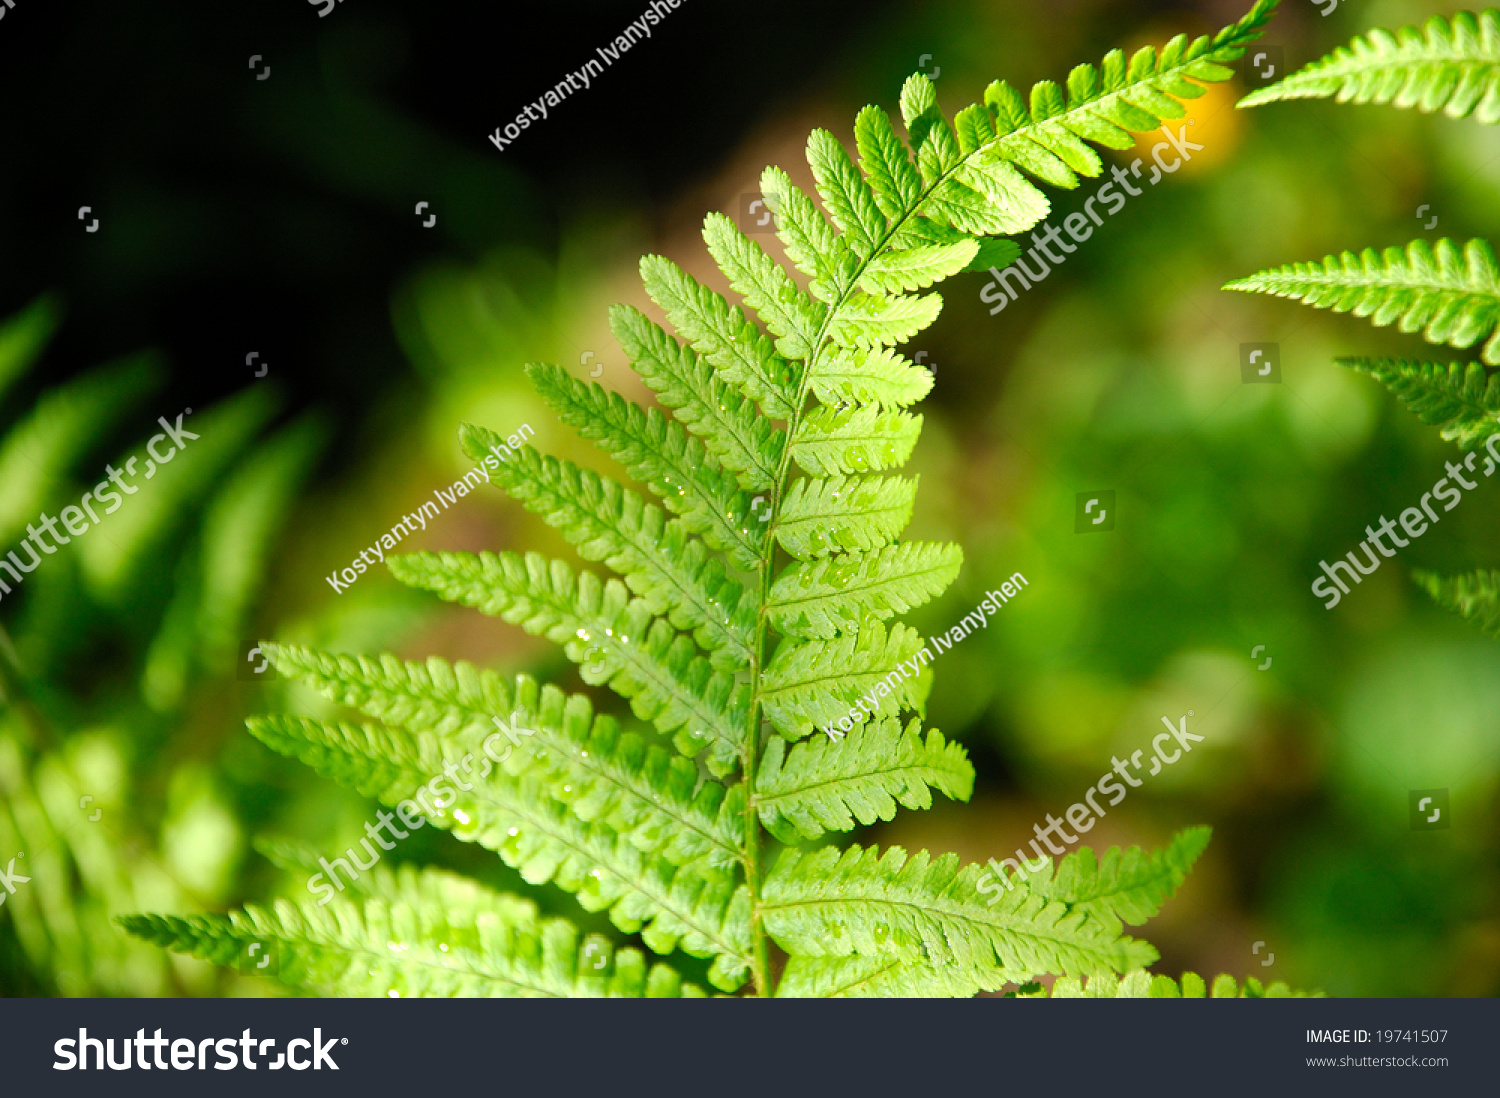 Green Young Fern Leaf Stock Photo 19741507 : Shutterstock